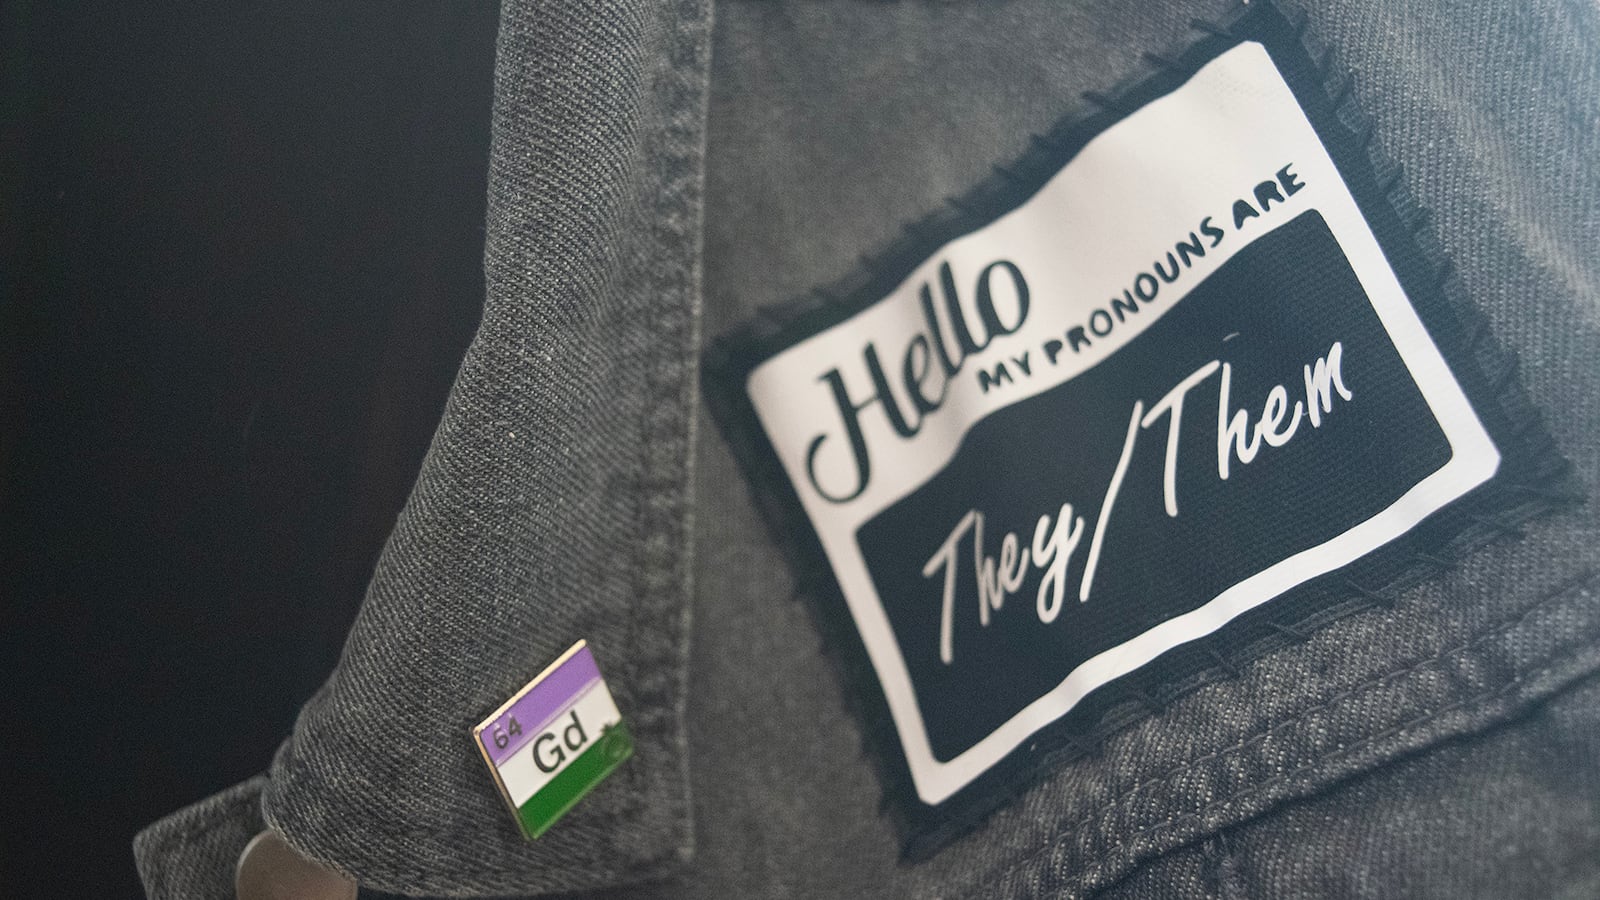 On a gray vest is a patch that reads “Hello my pronouns are they/them.” A small square pin with the genderqueer flag is pinned on the lapel. The pin is in the shape of a periodic table square.